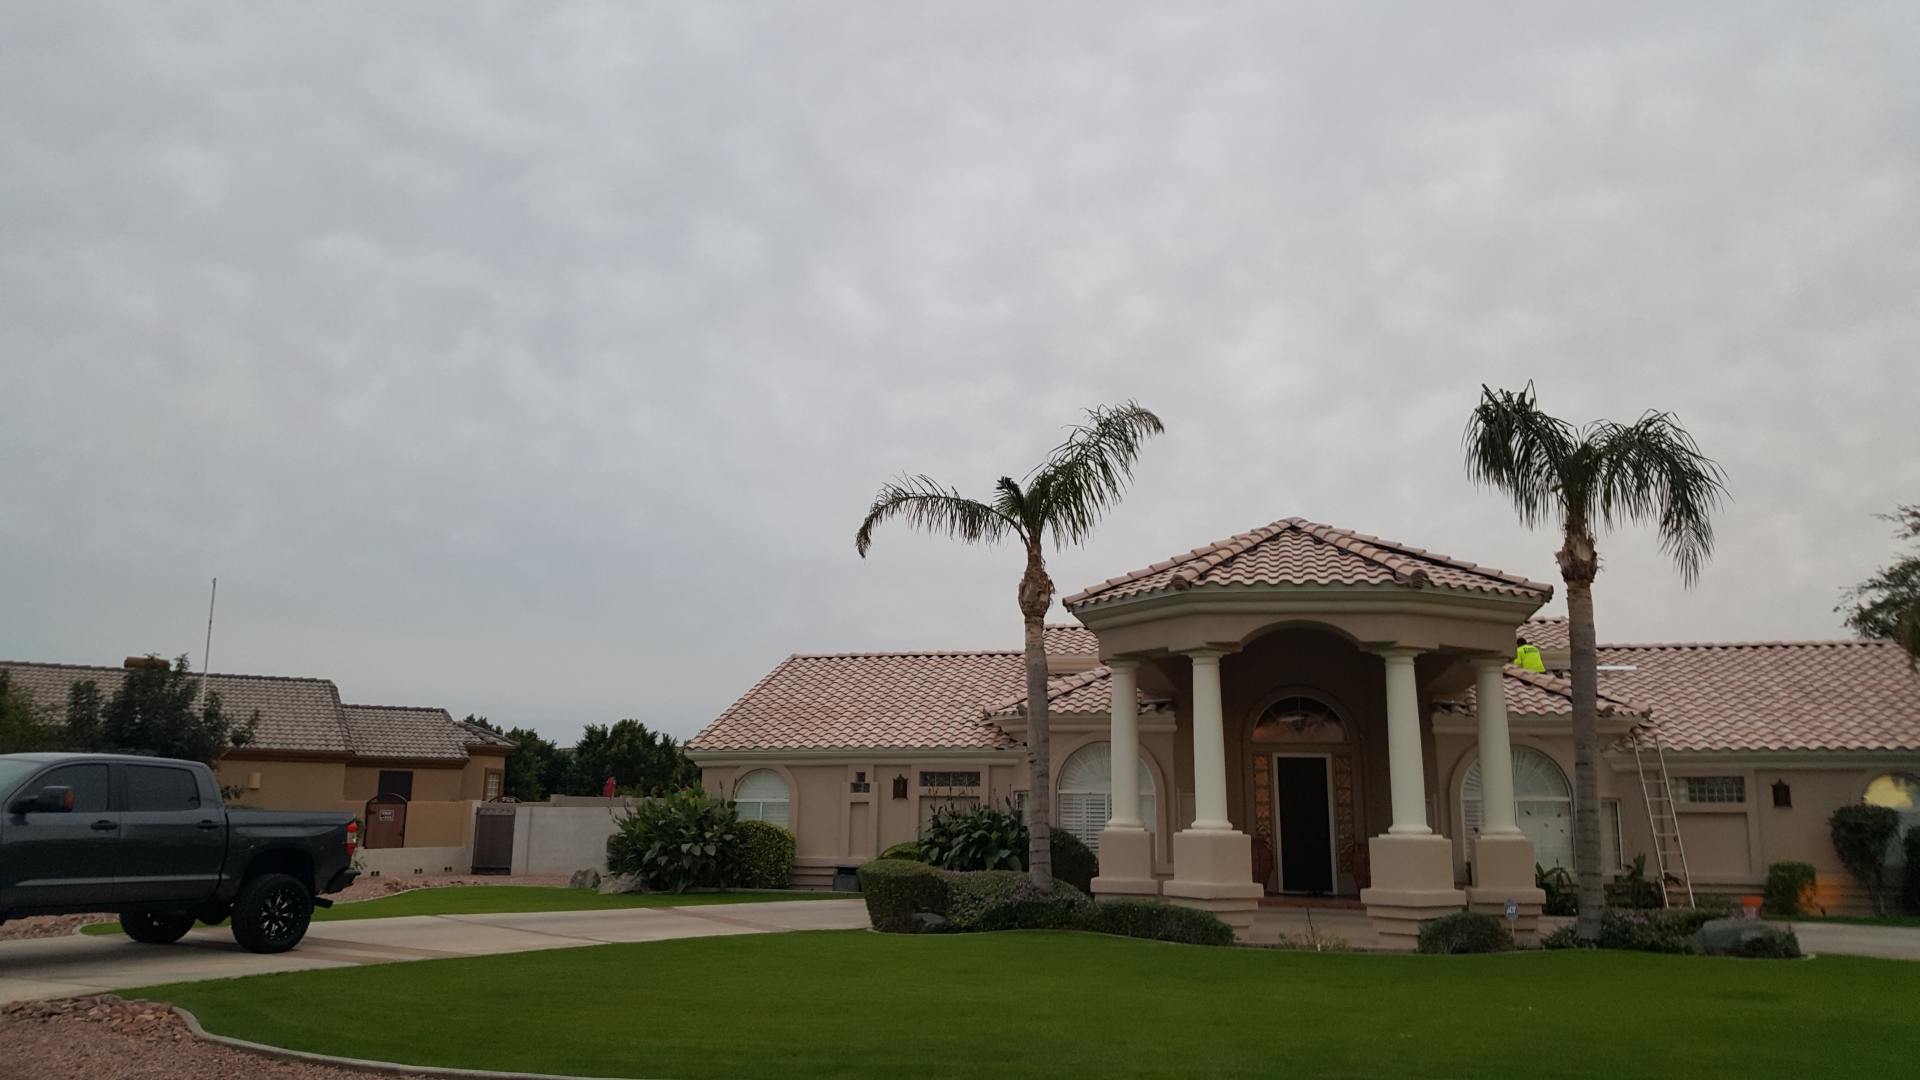 The work of our roofing contractor in Glendale, AZ